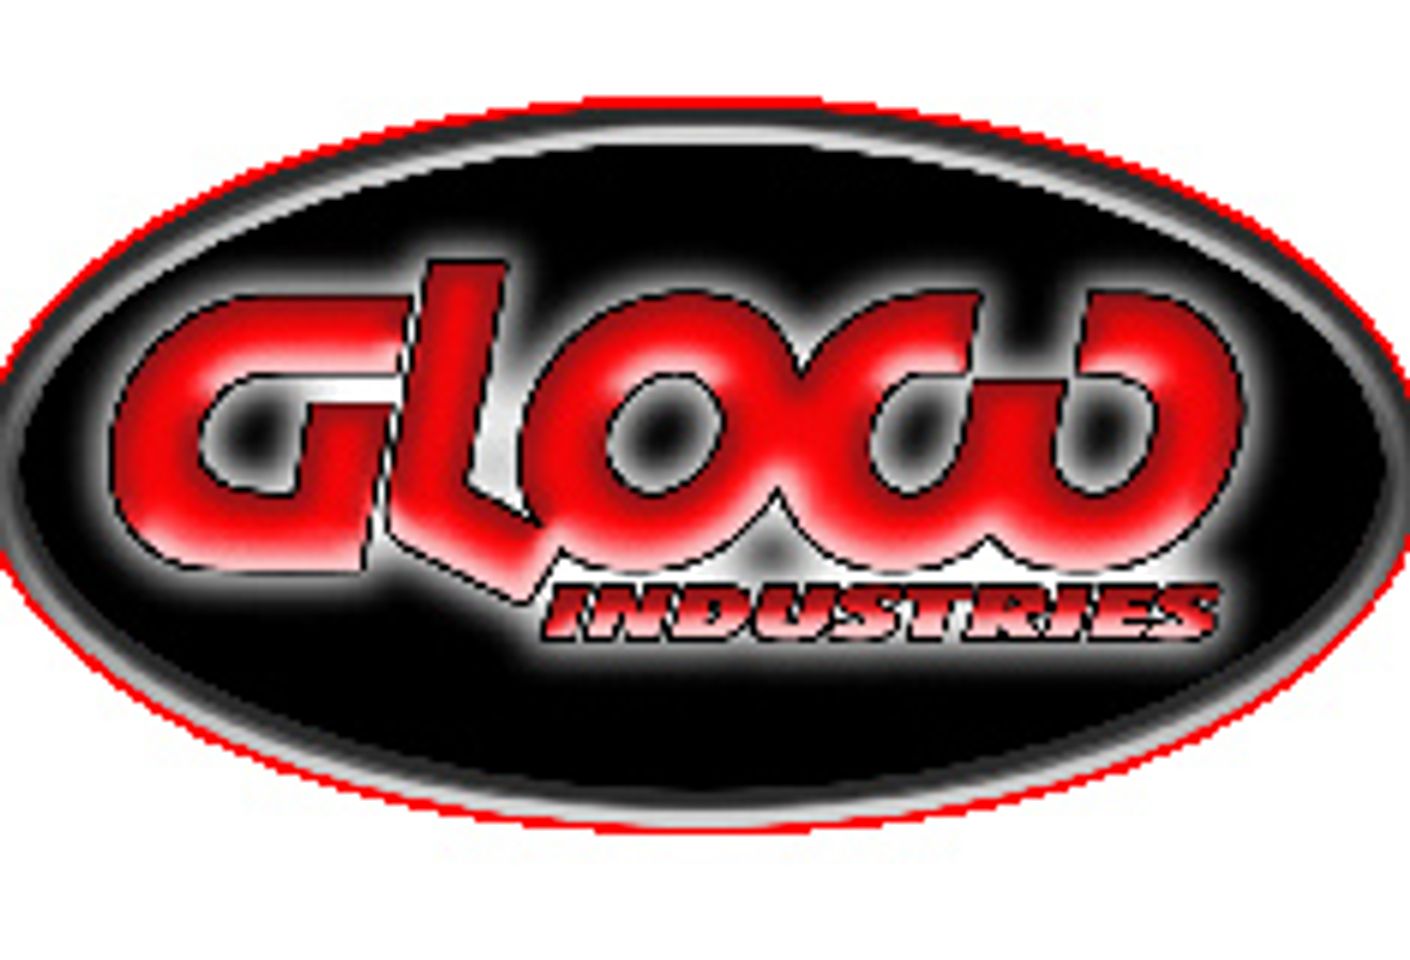 Glow Industries Releases Full Line Product Catalog